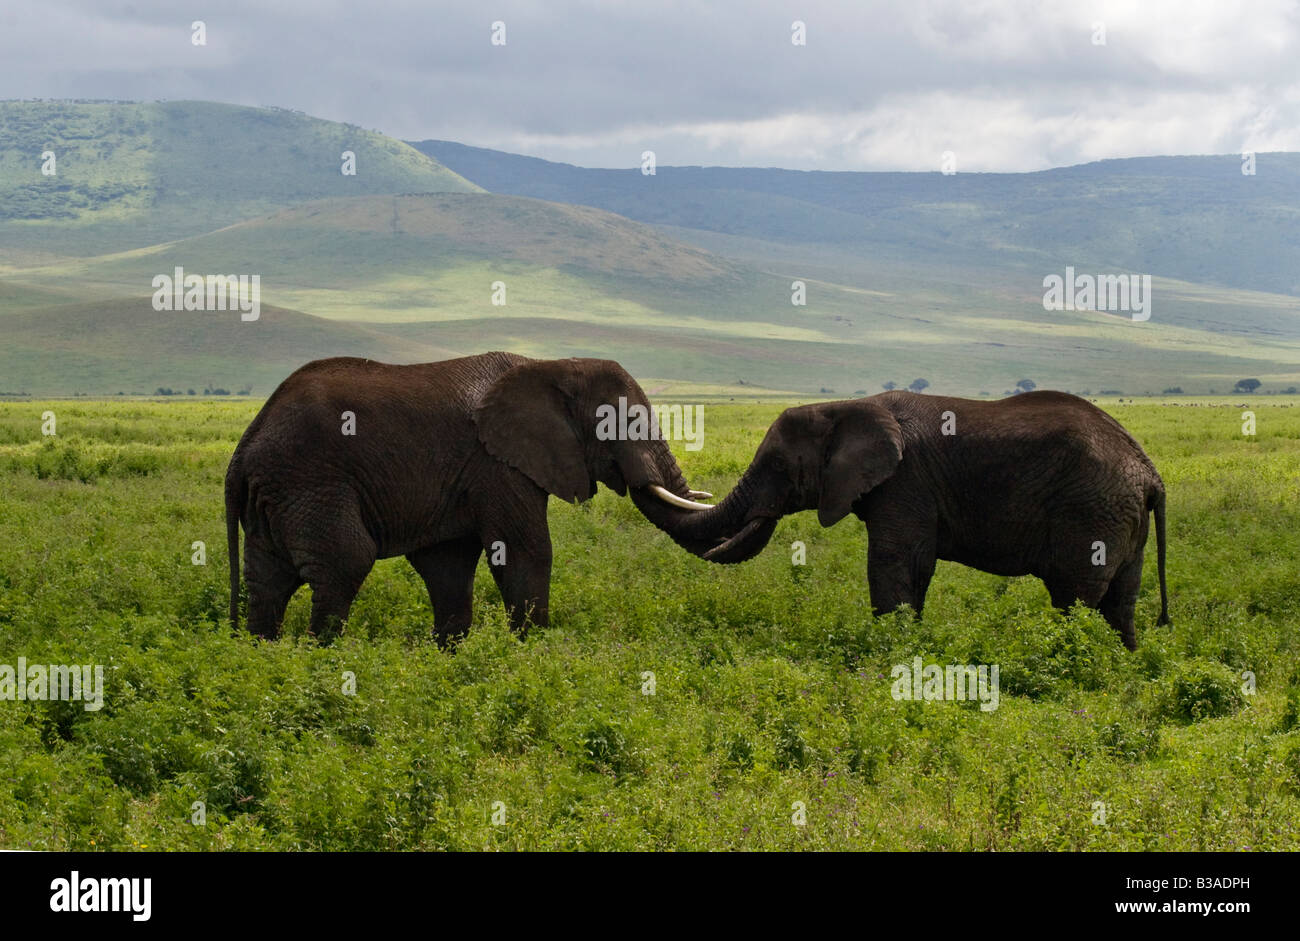 Two ELEPHANTS Loxodonta africana show affection by touching each other with their trunks NGORONGORO CRATER TANZANIA Stock Photo